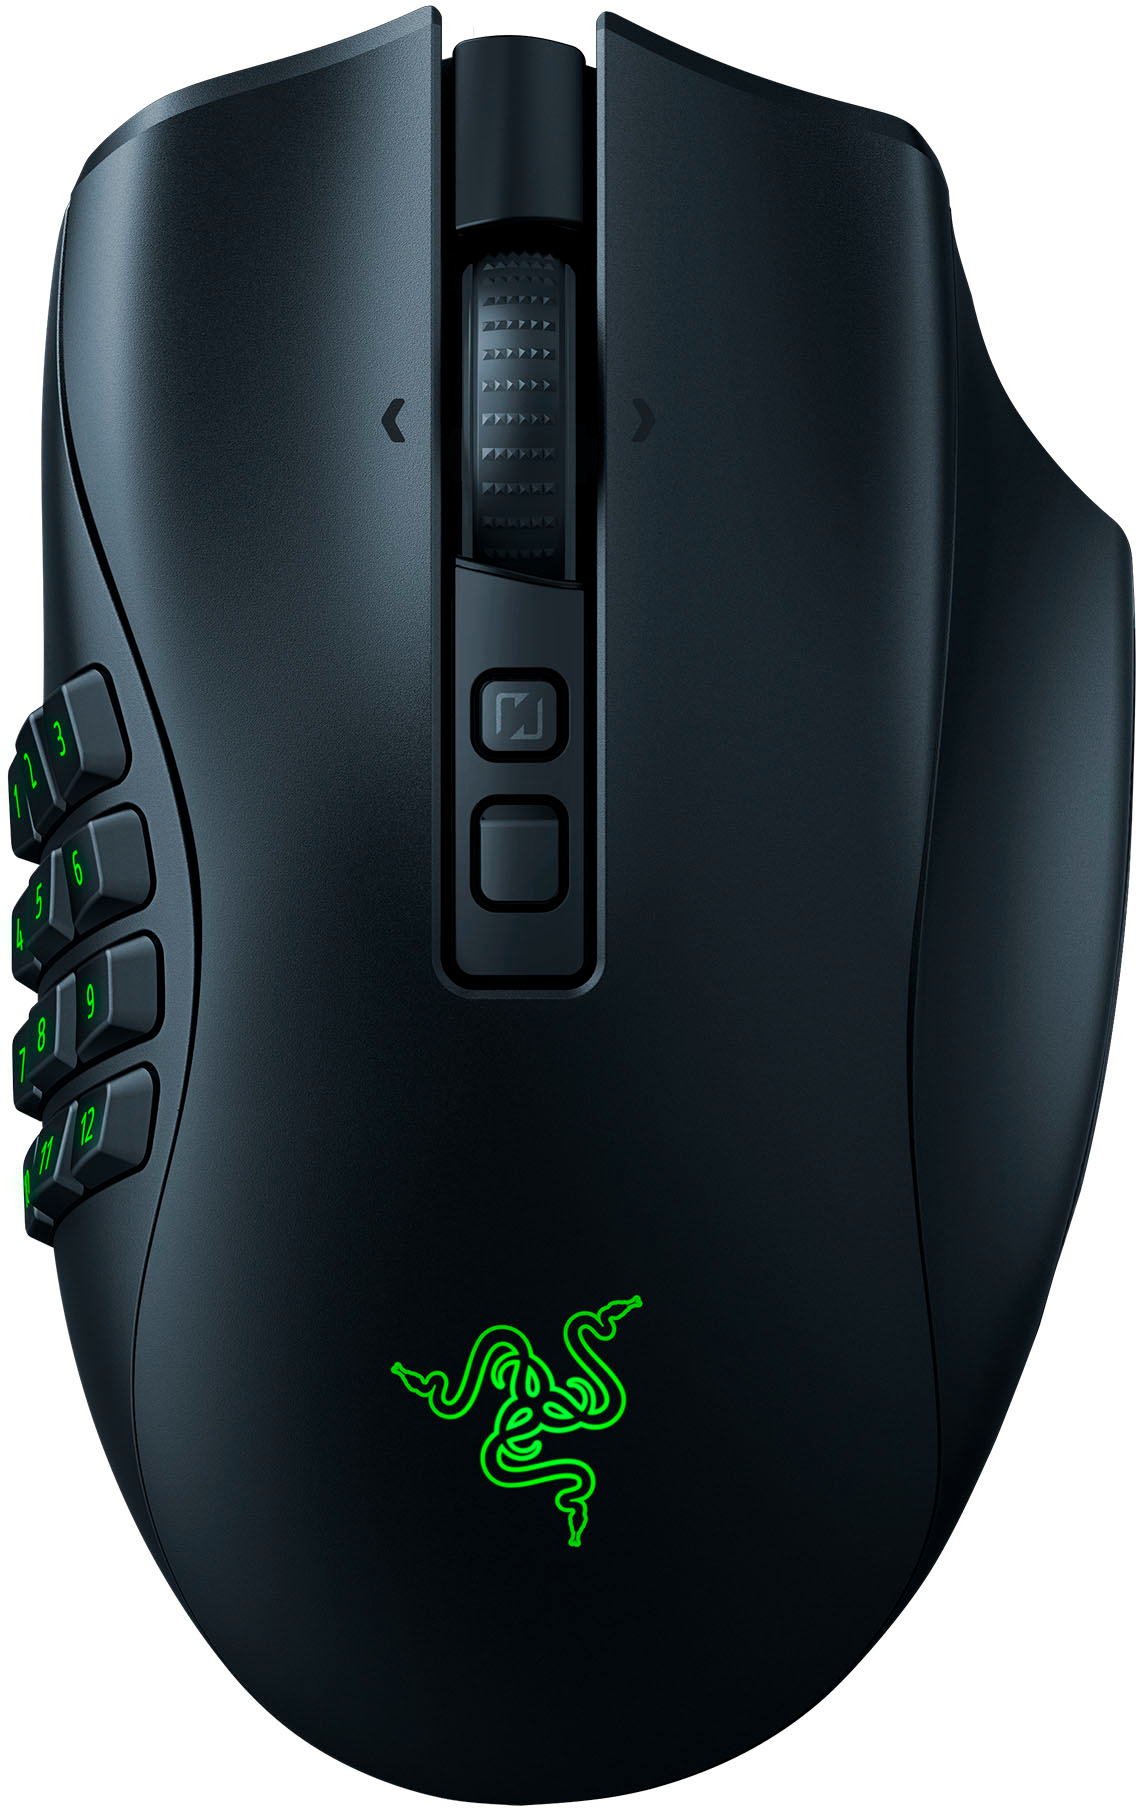 Razer, For Gamers. By Gamers.